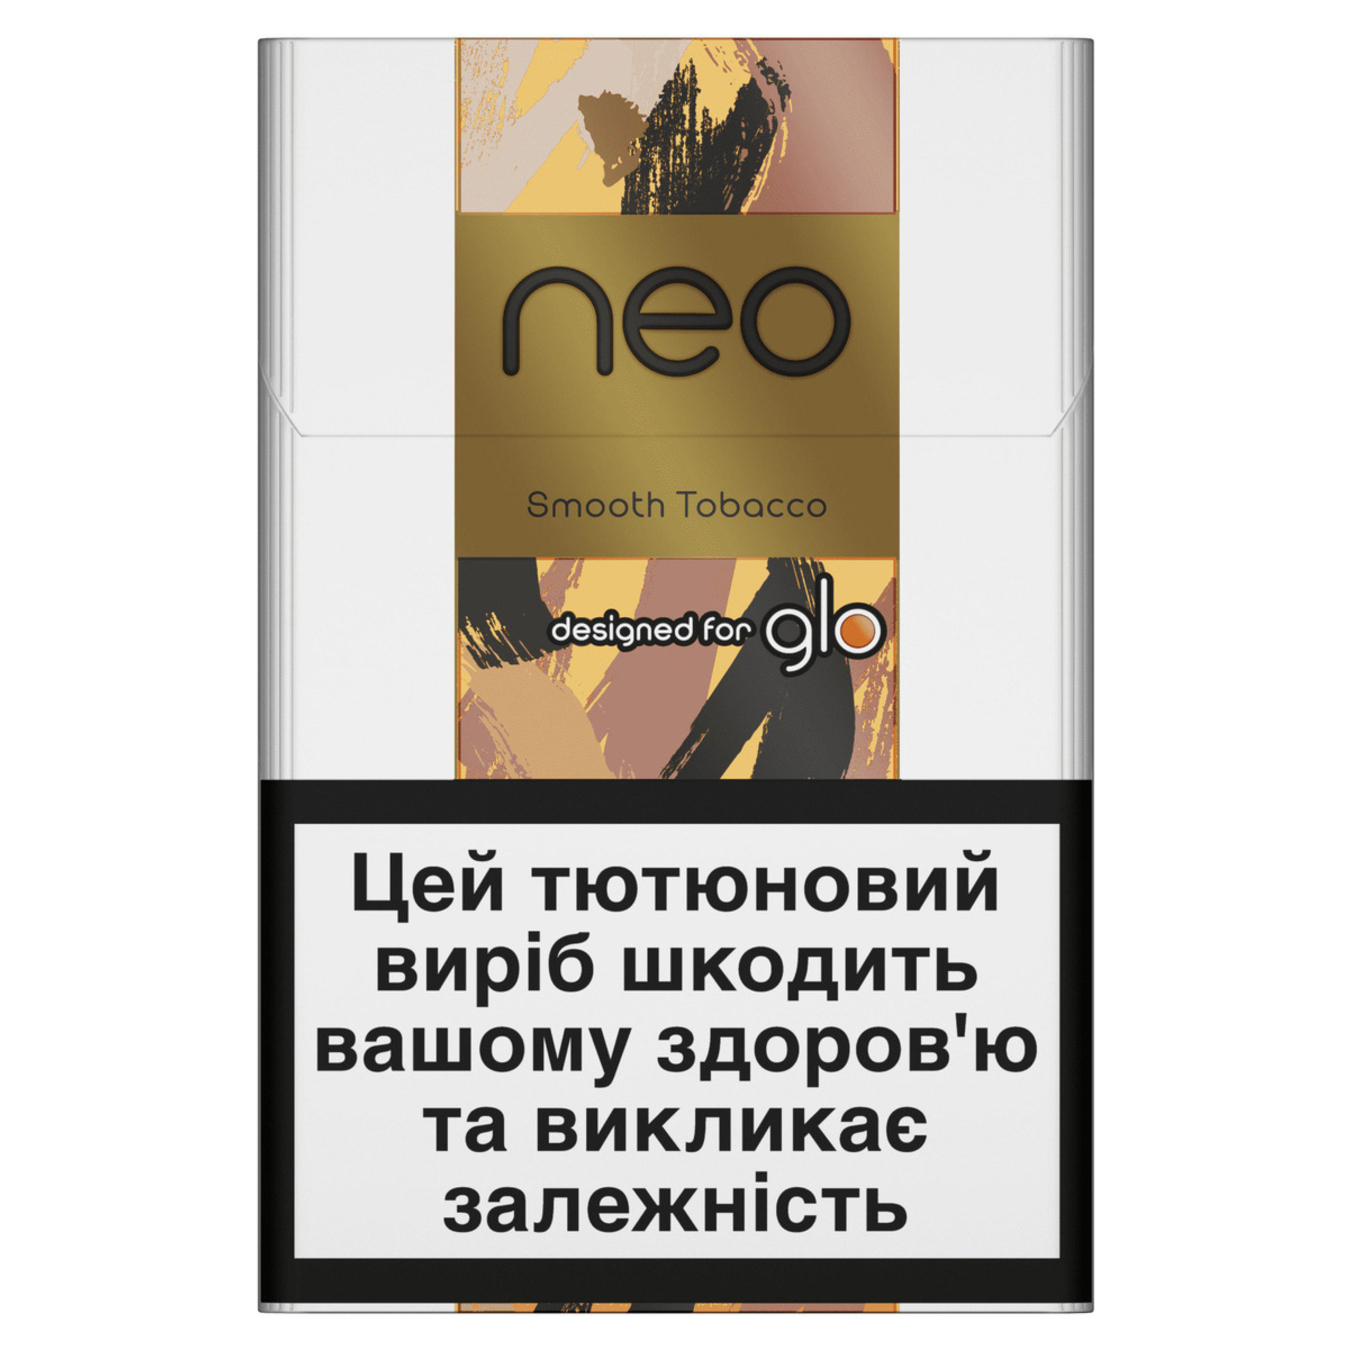 Tobacco Sticks Neo Glo Stiks Creamy Tobacco for heating 20 pcs (the price  is indicated without excise tax)